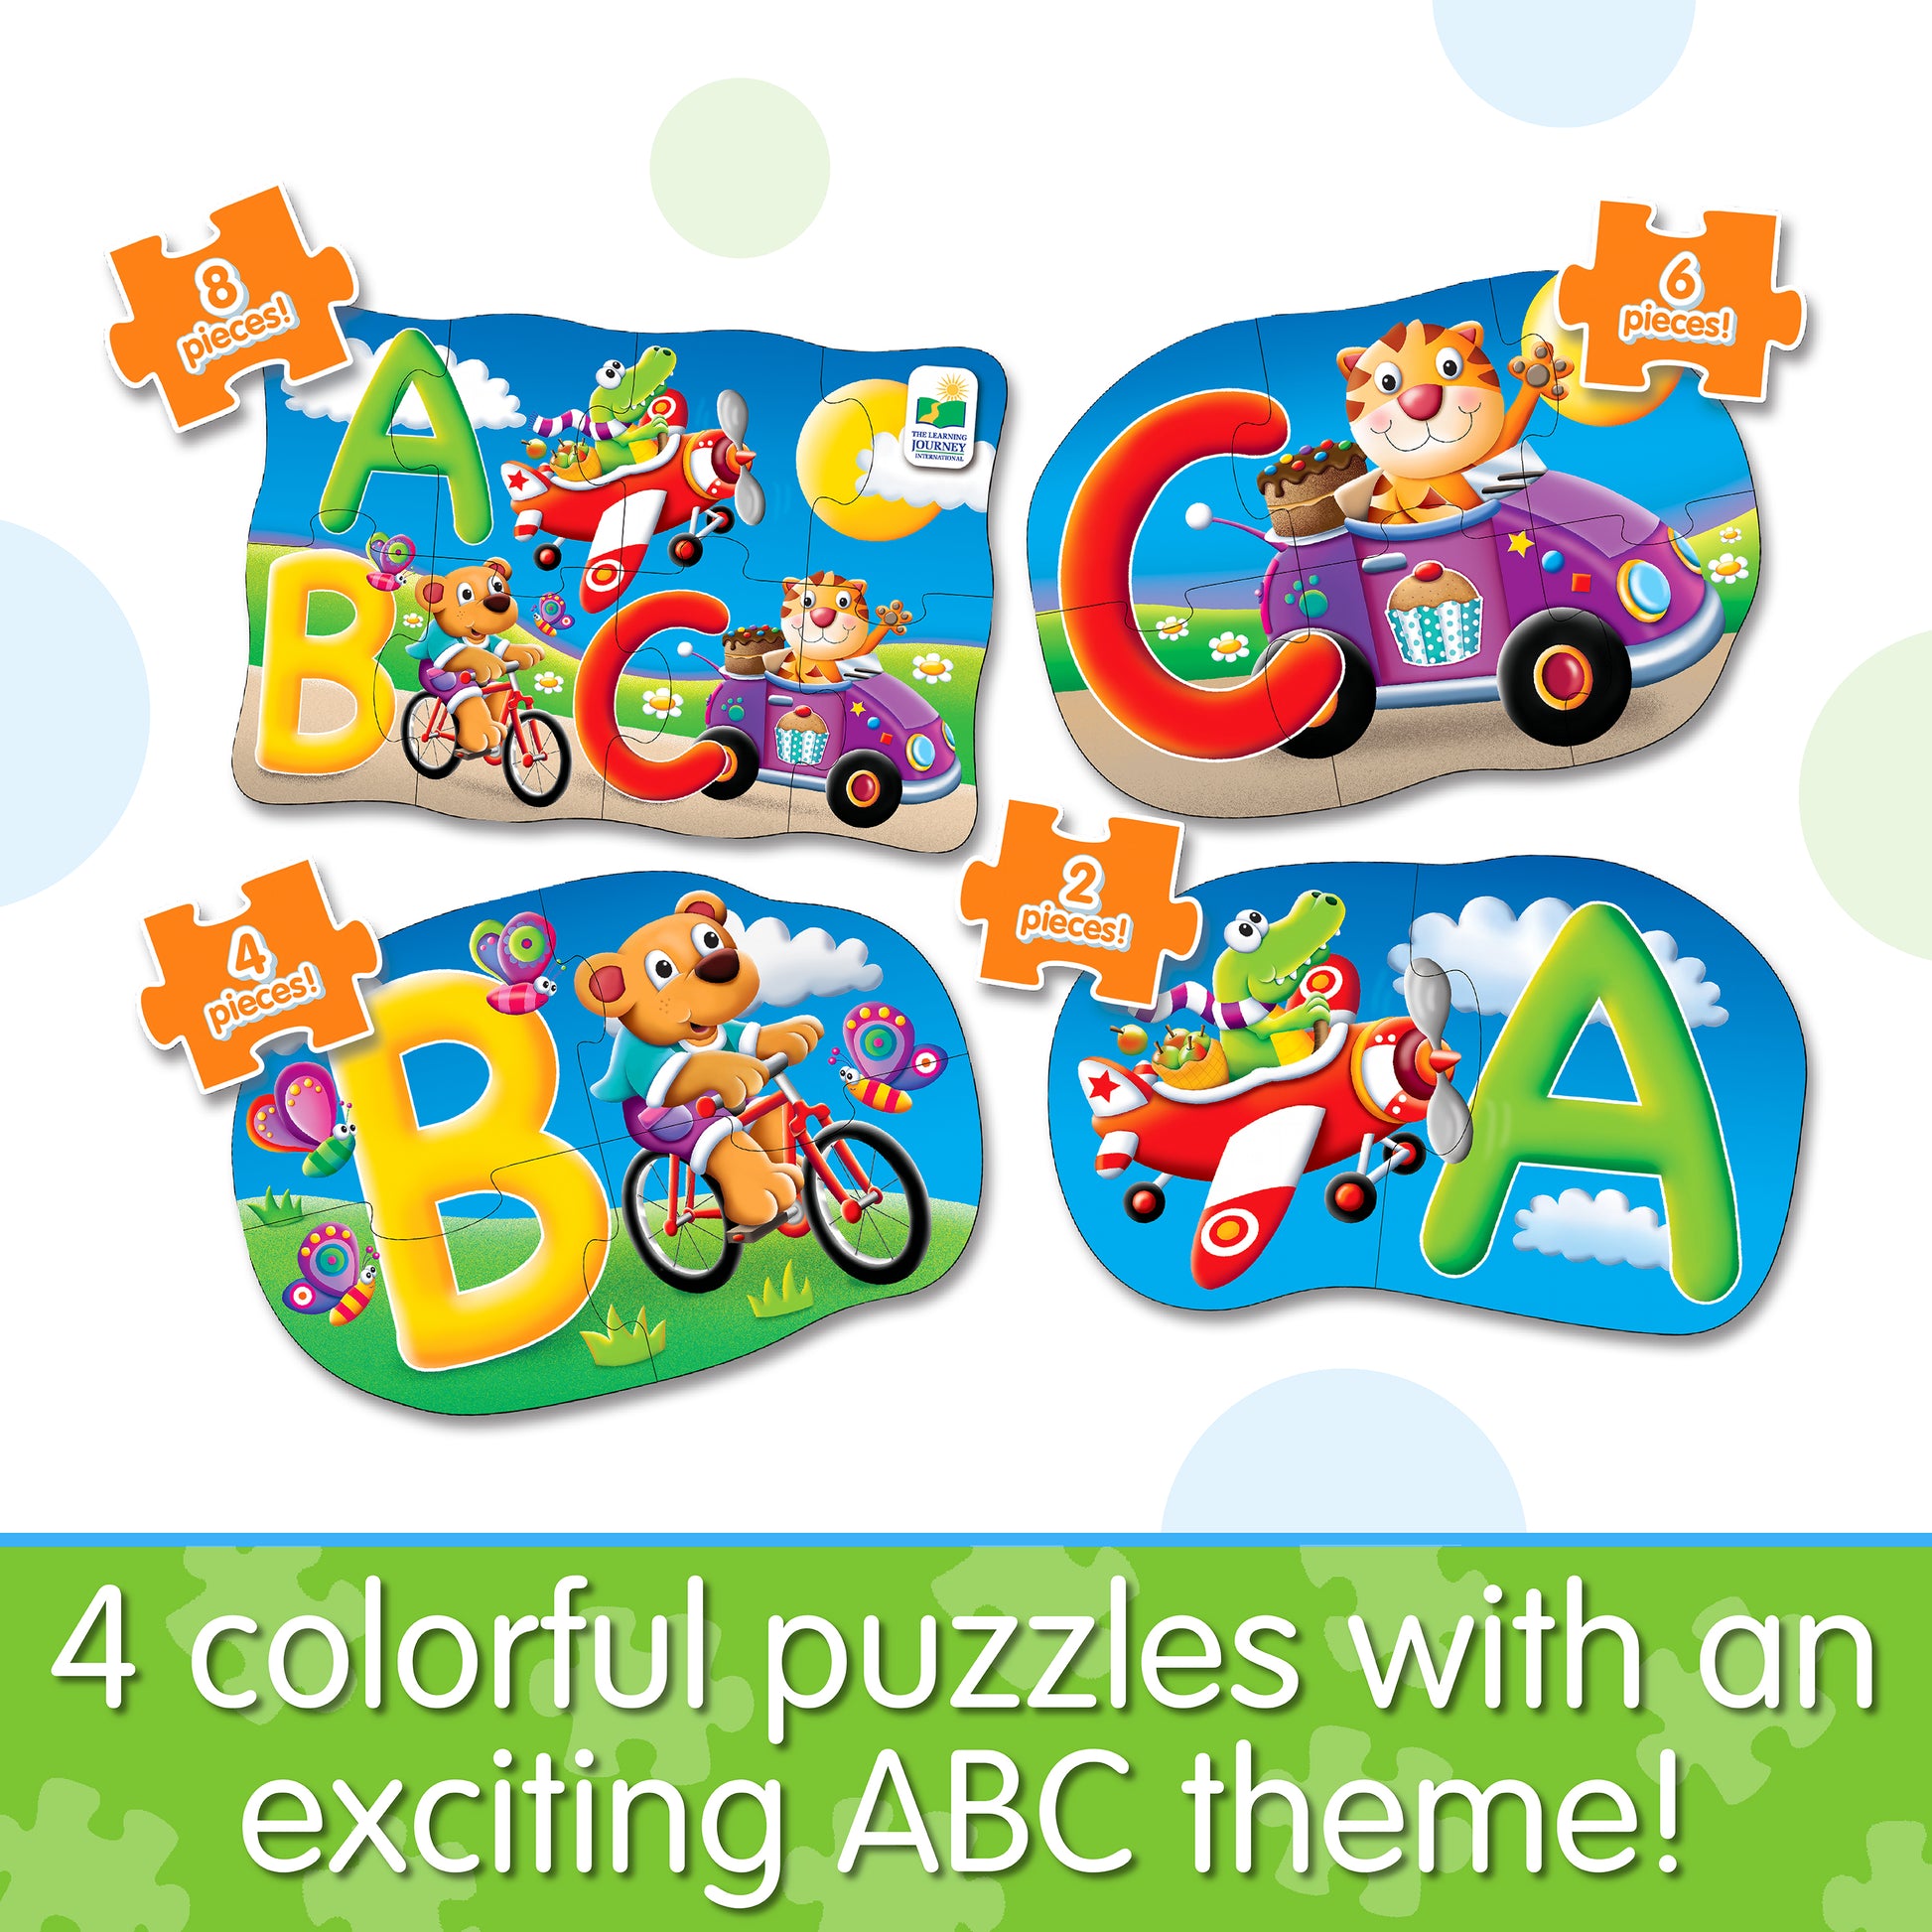 Infographic about 4-In-A-Box ABC Puzzle that says, "4 colorful puzzles with an exciting ABC theme!"